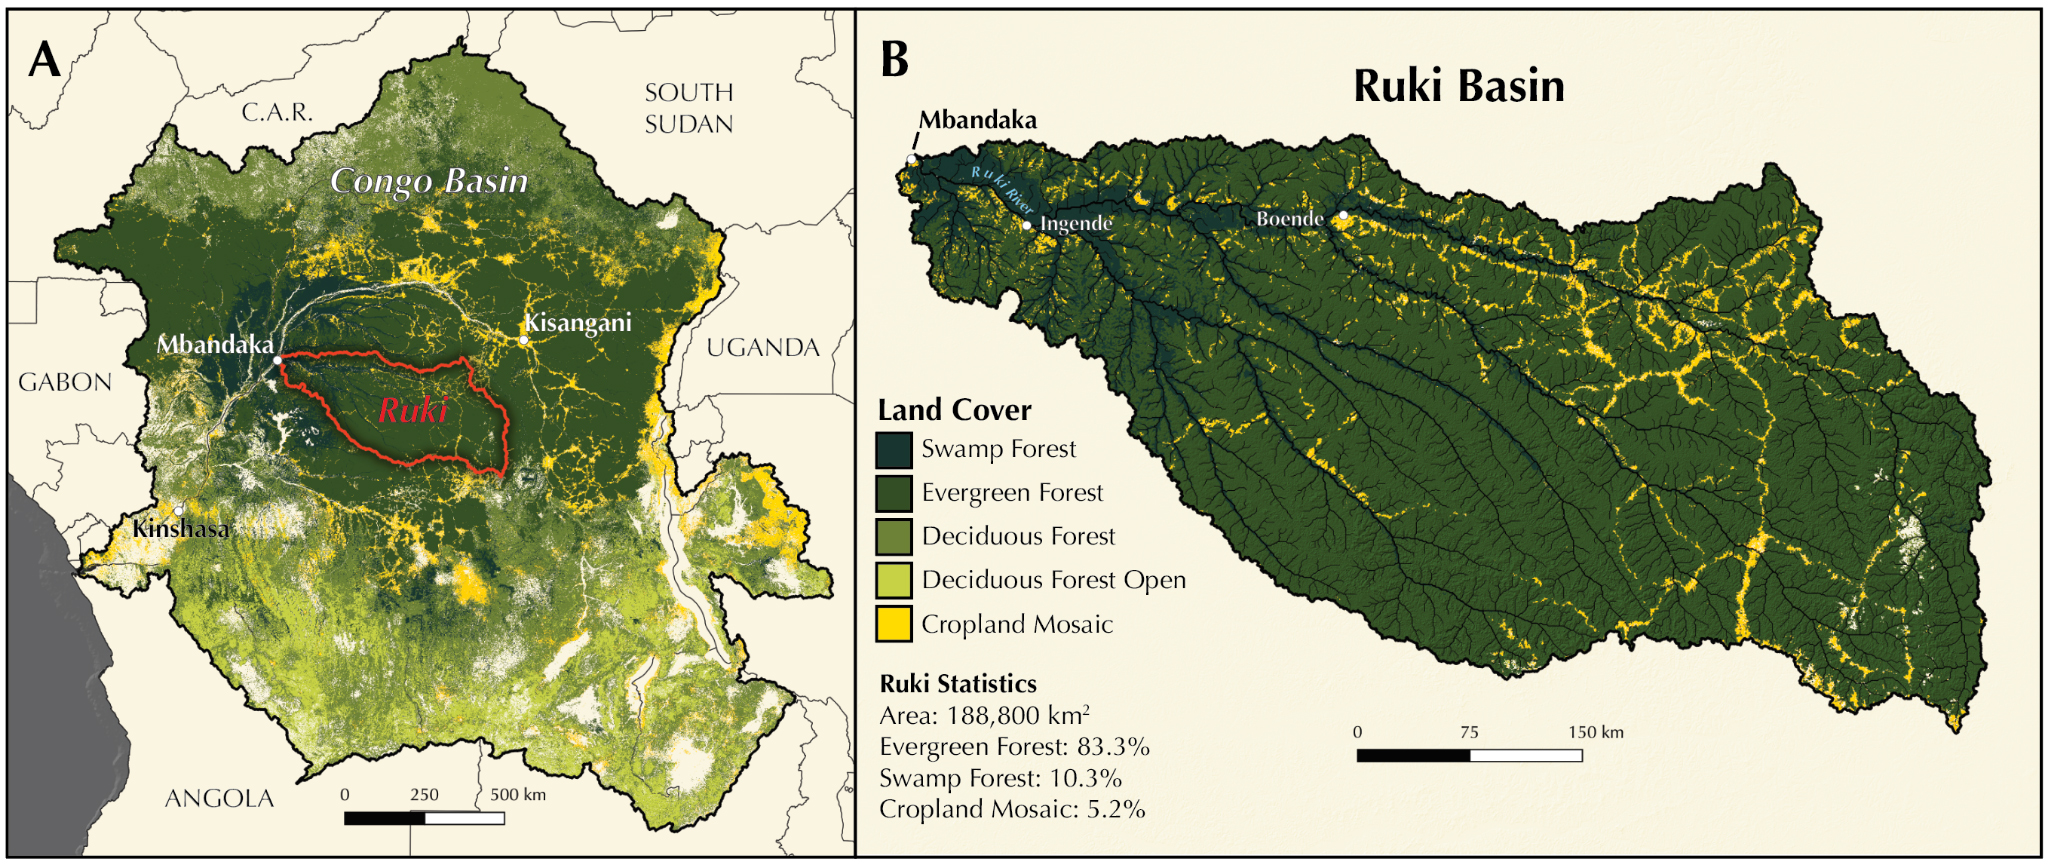 Enlarged view: Map showing the Ruki Basin in the Democratic Republic of Congo (left) and map showing the Ruki Basin (right).